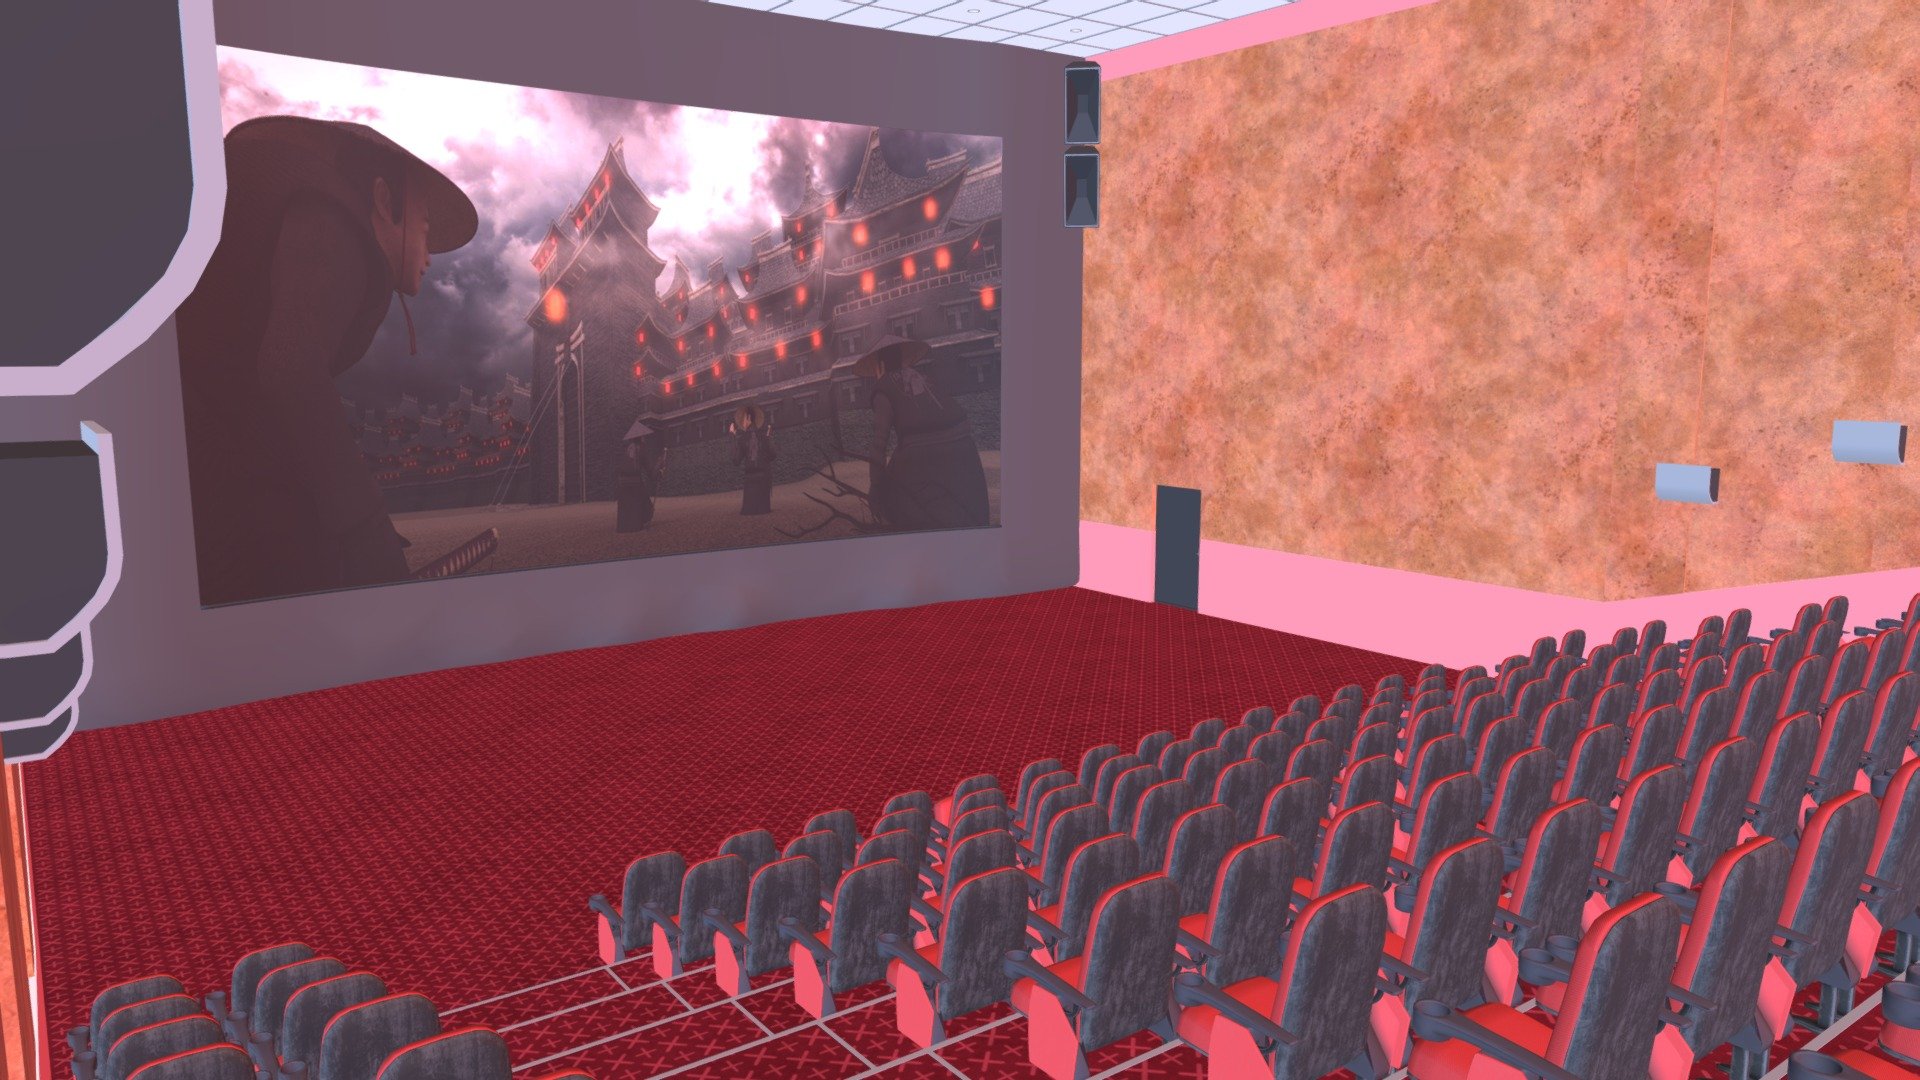 Cinema - interior for your presentation films and other project.You can play your movie for VR.
All materials PBR.

Pack includes:
- Cinema interior in two colors. And you can create other Interior coloring.
- Cinema chair. You can create any number of chair lines.
- Screen - Cinema Hall - Buy Royalty Free 3D model by Mixall (@Mixaills) 3d model